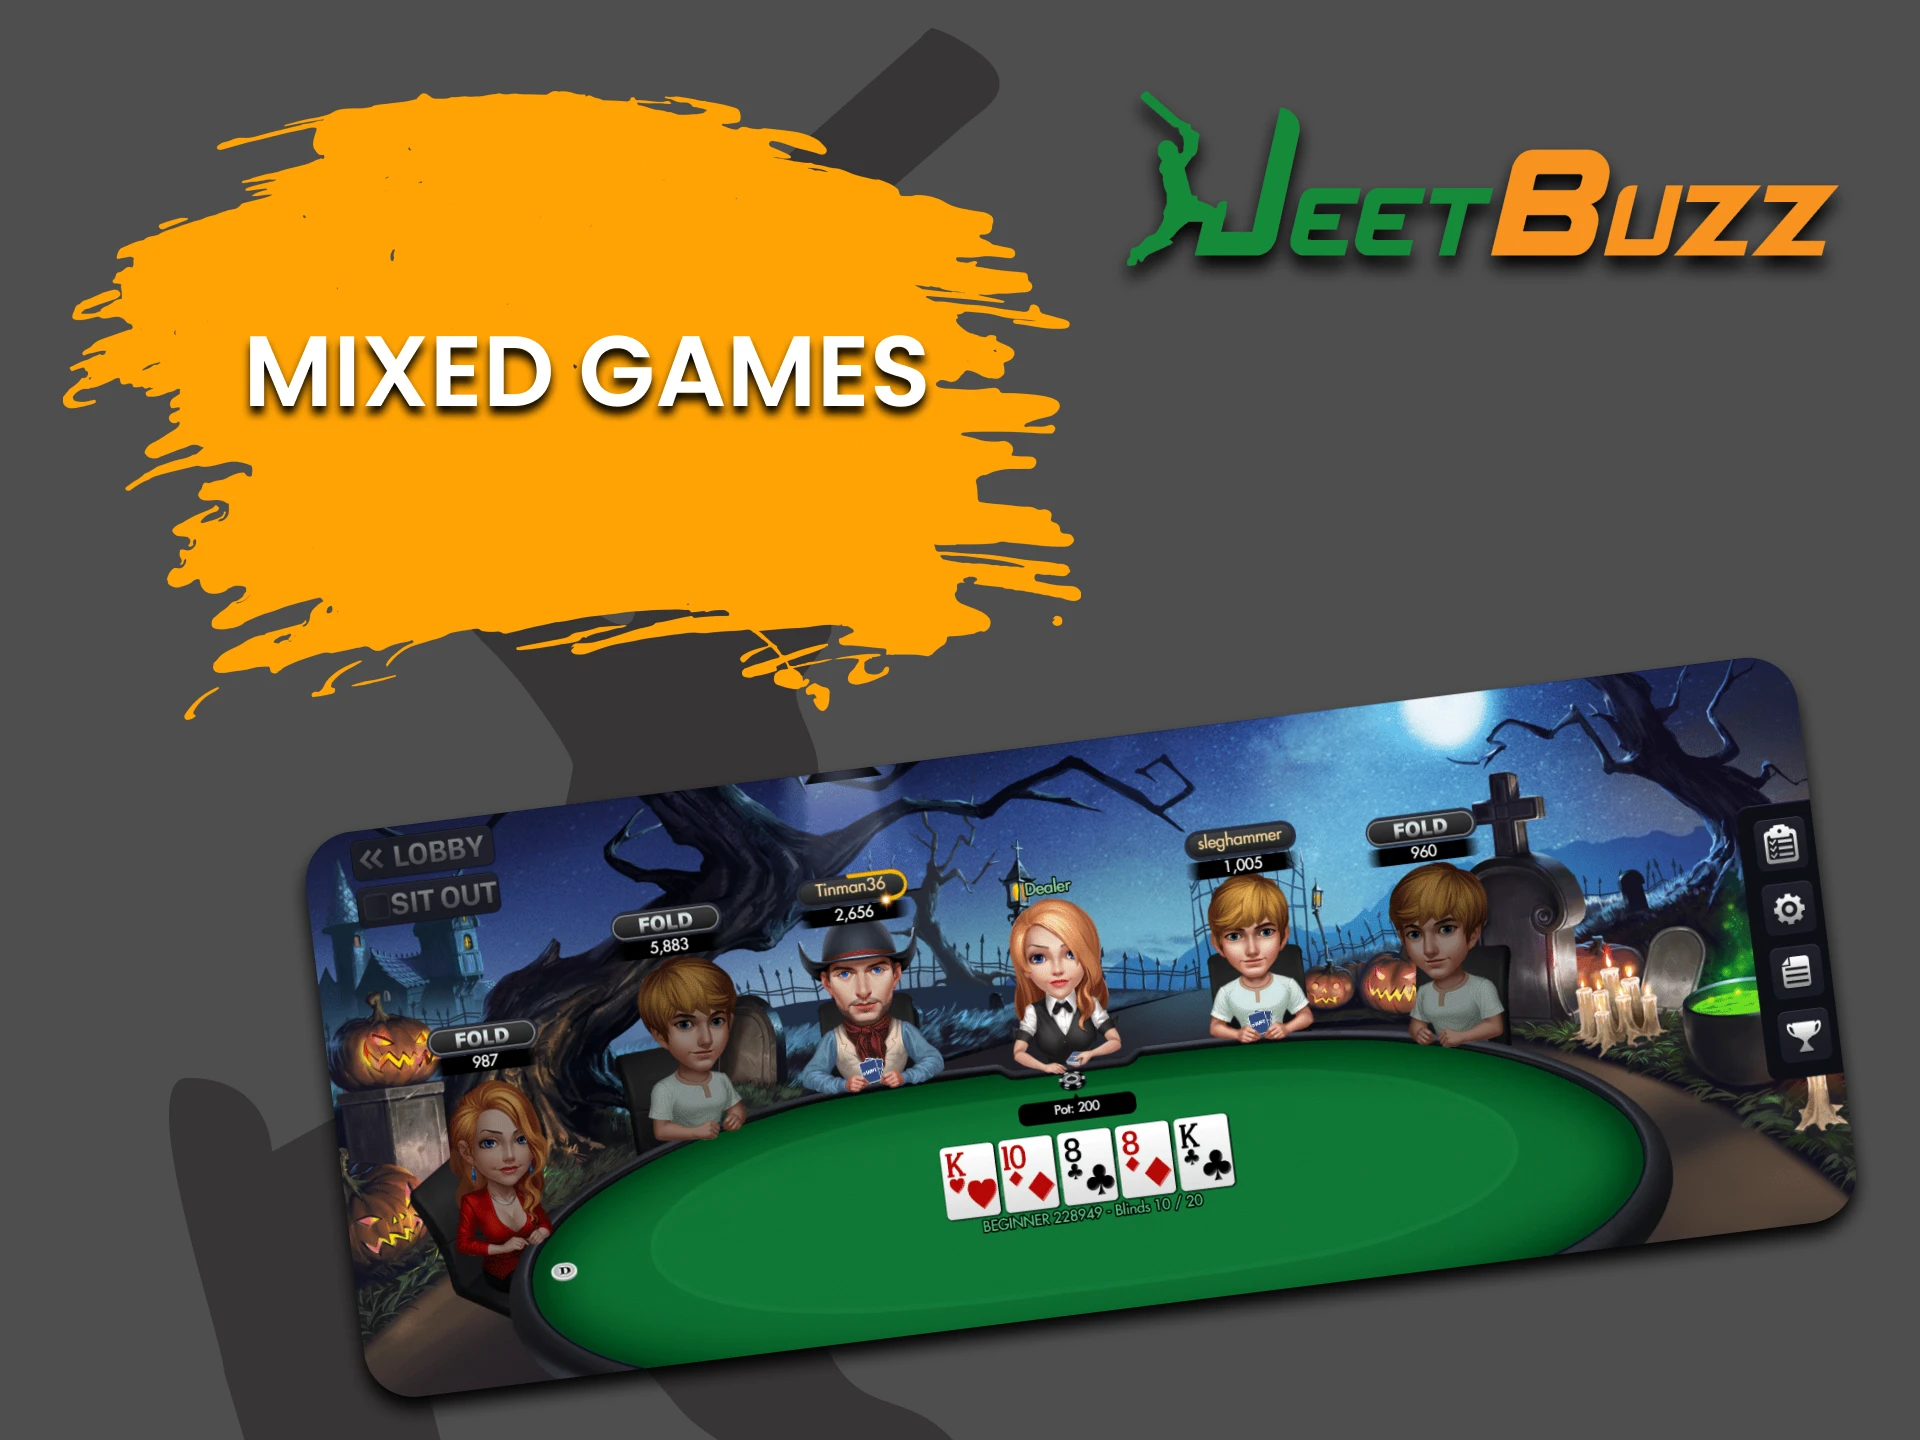 To play Poker on JeetBuzz, choose Mixed Games.